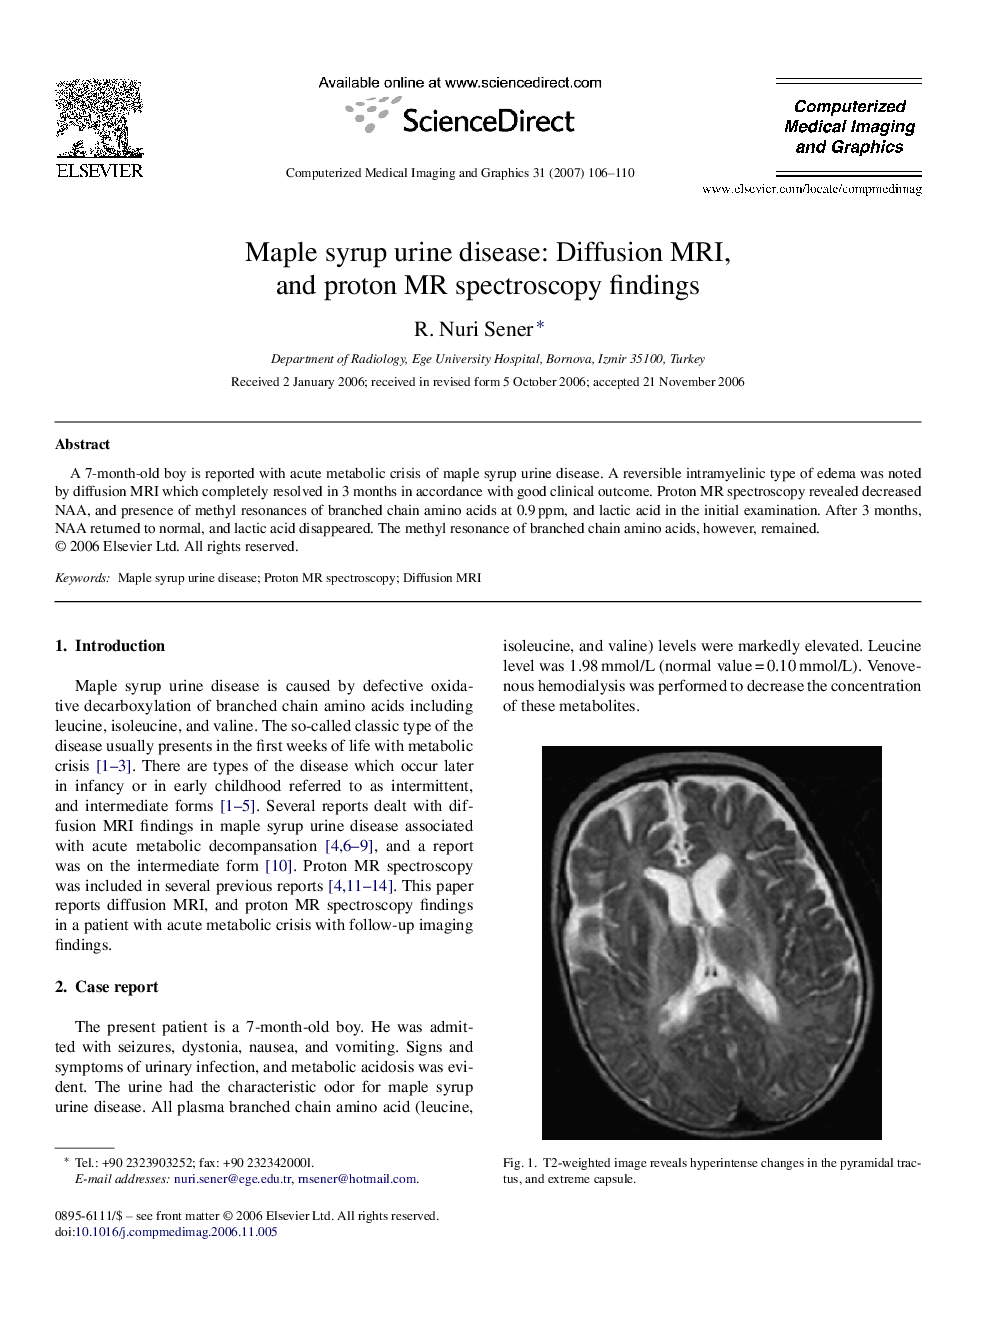 Maple syrup urine disease: Diffusion MRI, and proton MR spectroscopy findings